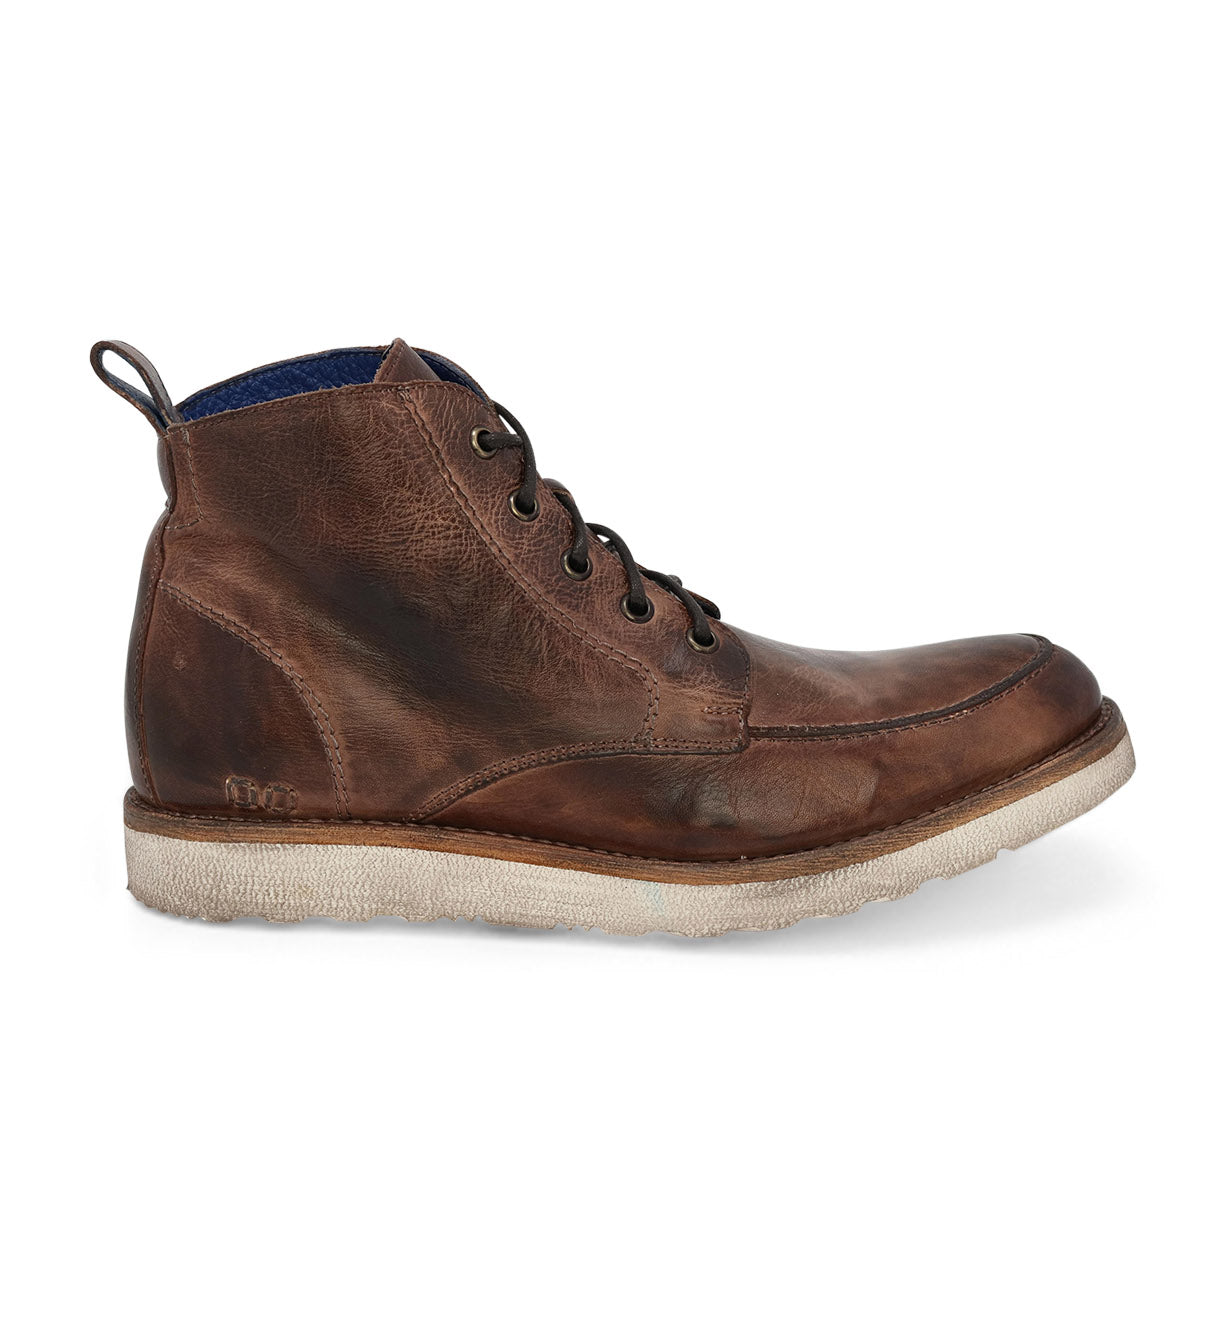 A worn brown men's leather boot with laces and a light-colored rubber sole, isolated on a white background. (Product name: Lincoln, Brand name: Bed Stu)